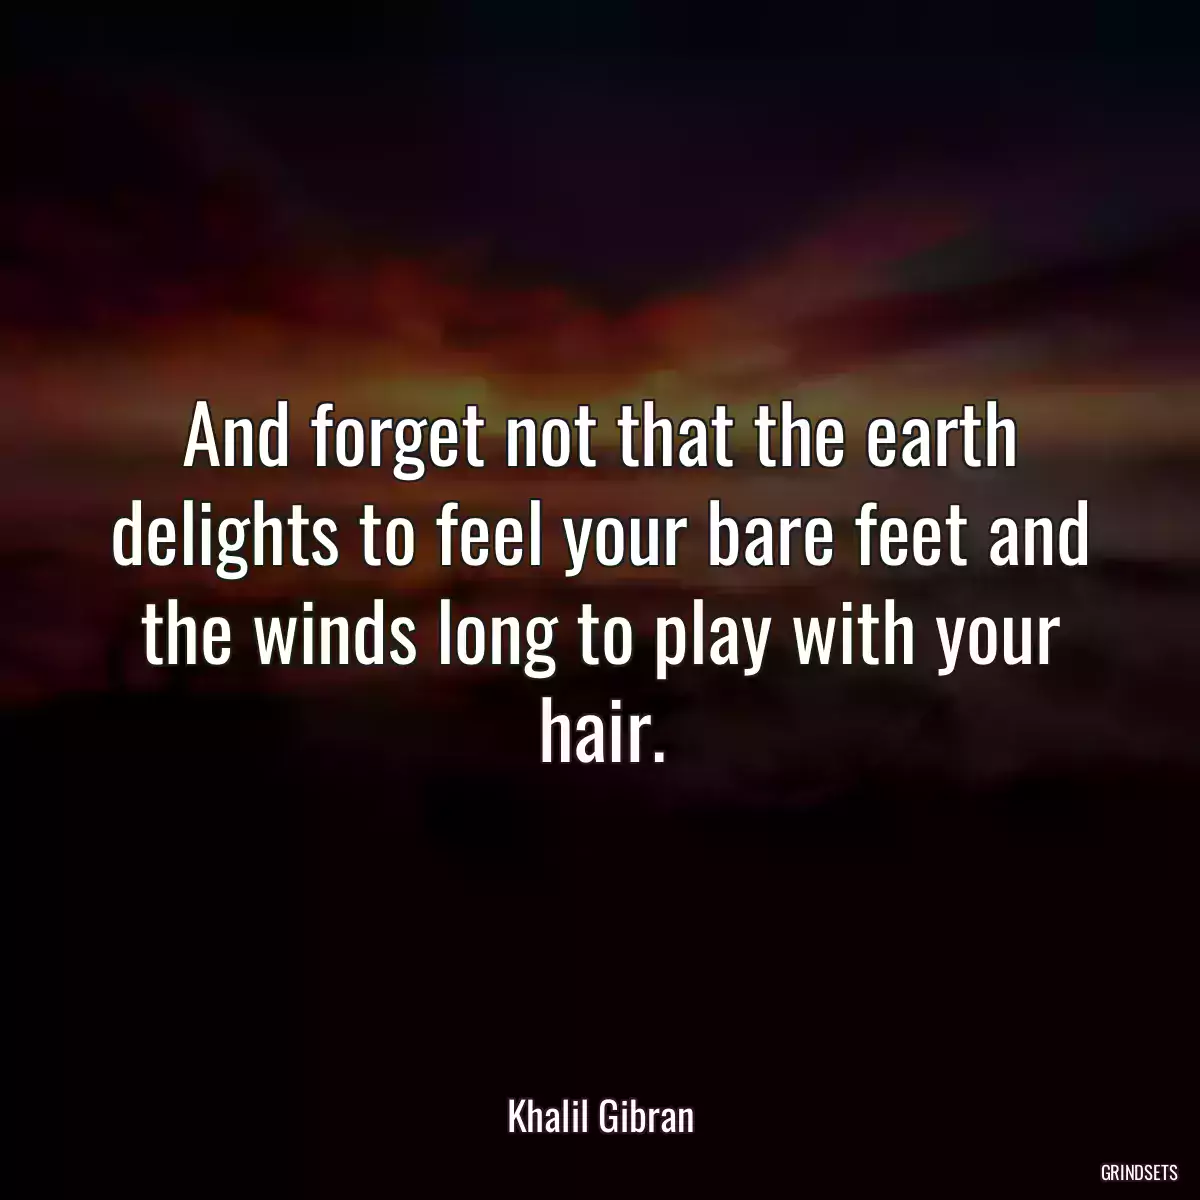 And forget not that the earth delights to feel your bare feet and the winds long to play with your hair.